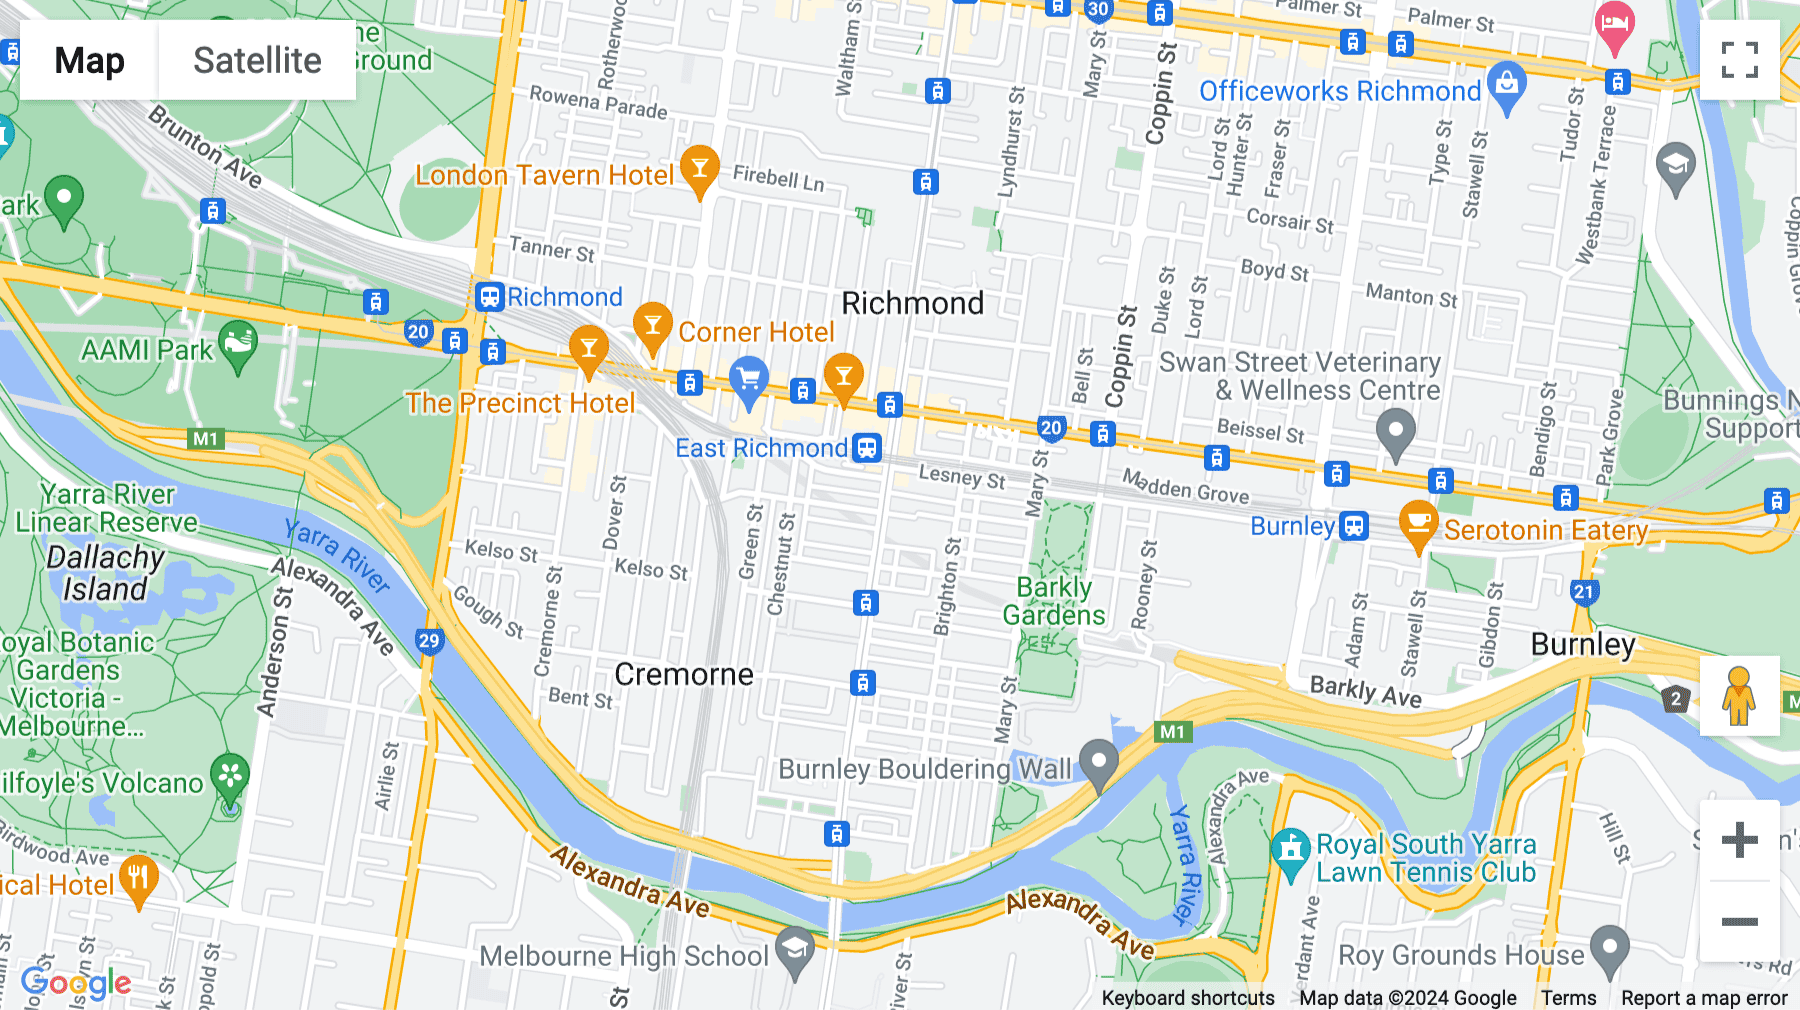 Click for interative map of Hub Church Street, 459 Church Street, Level 4, Melbourne